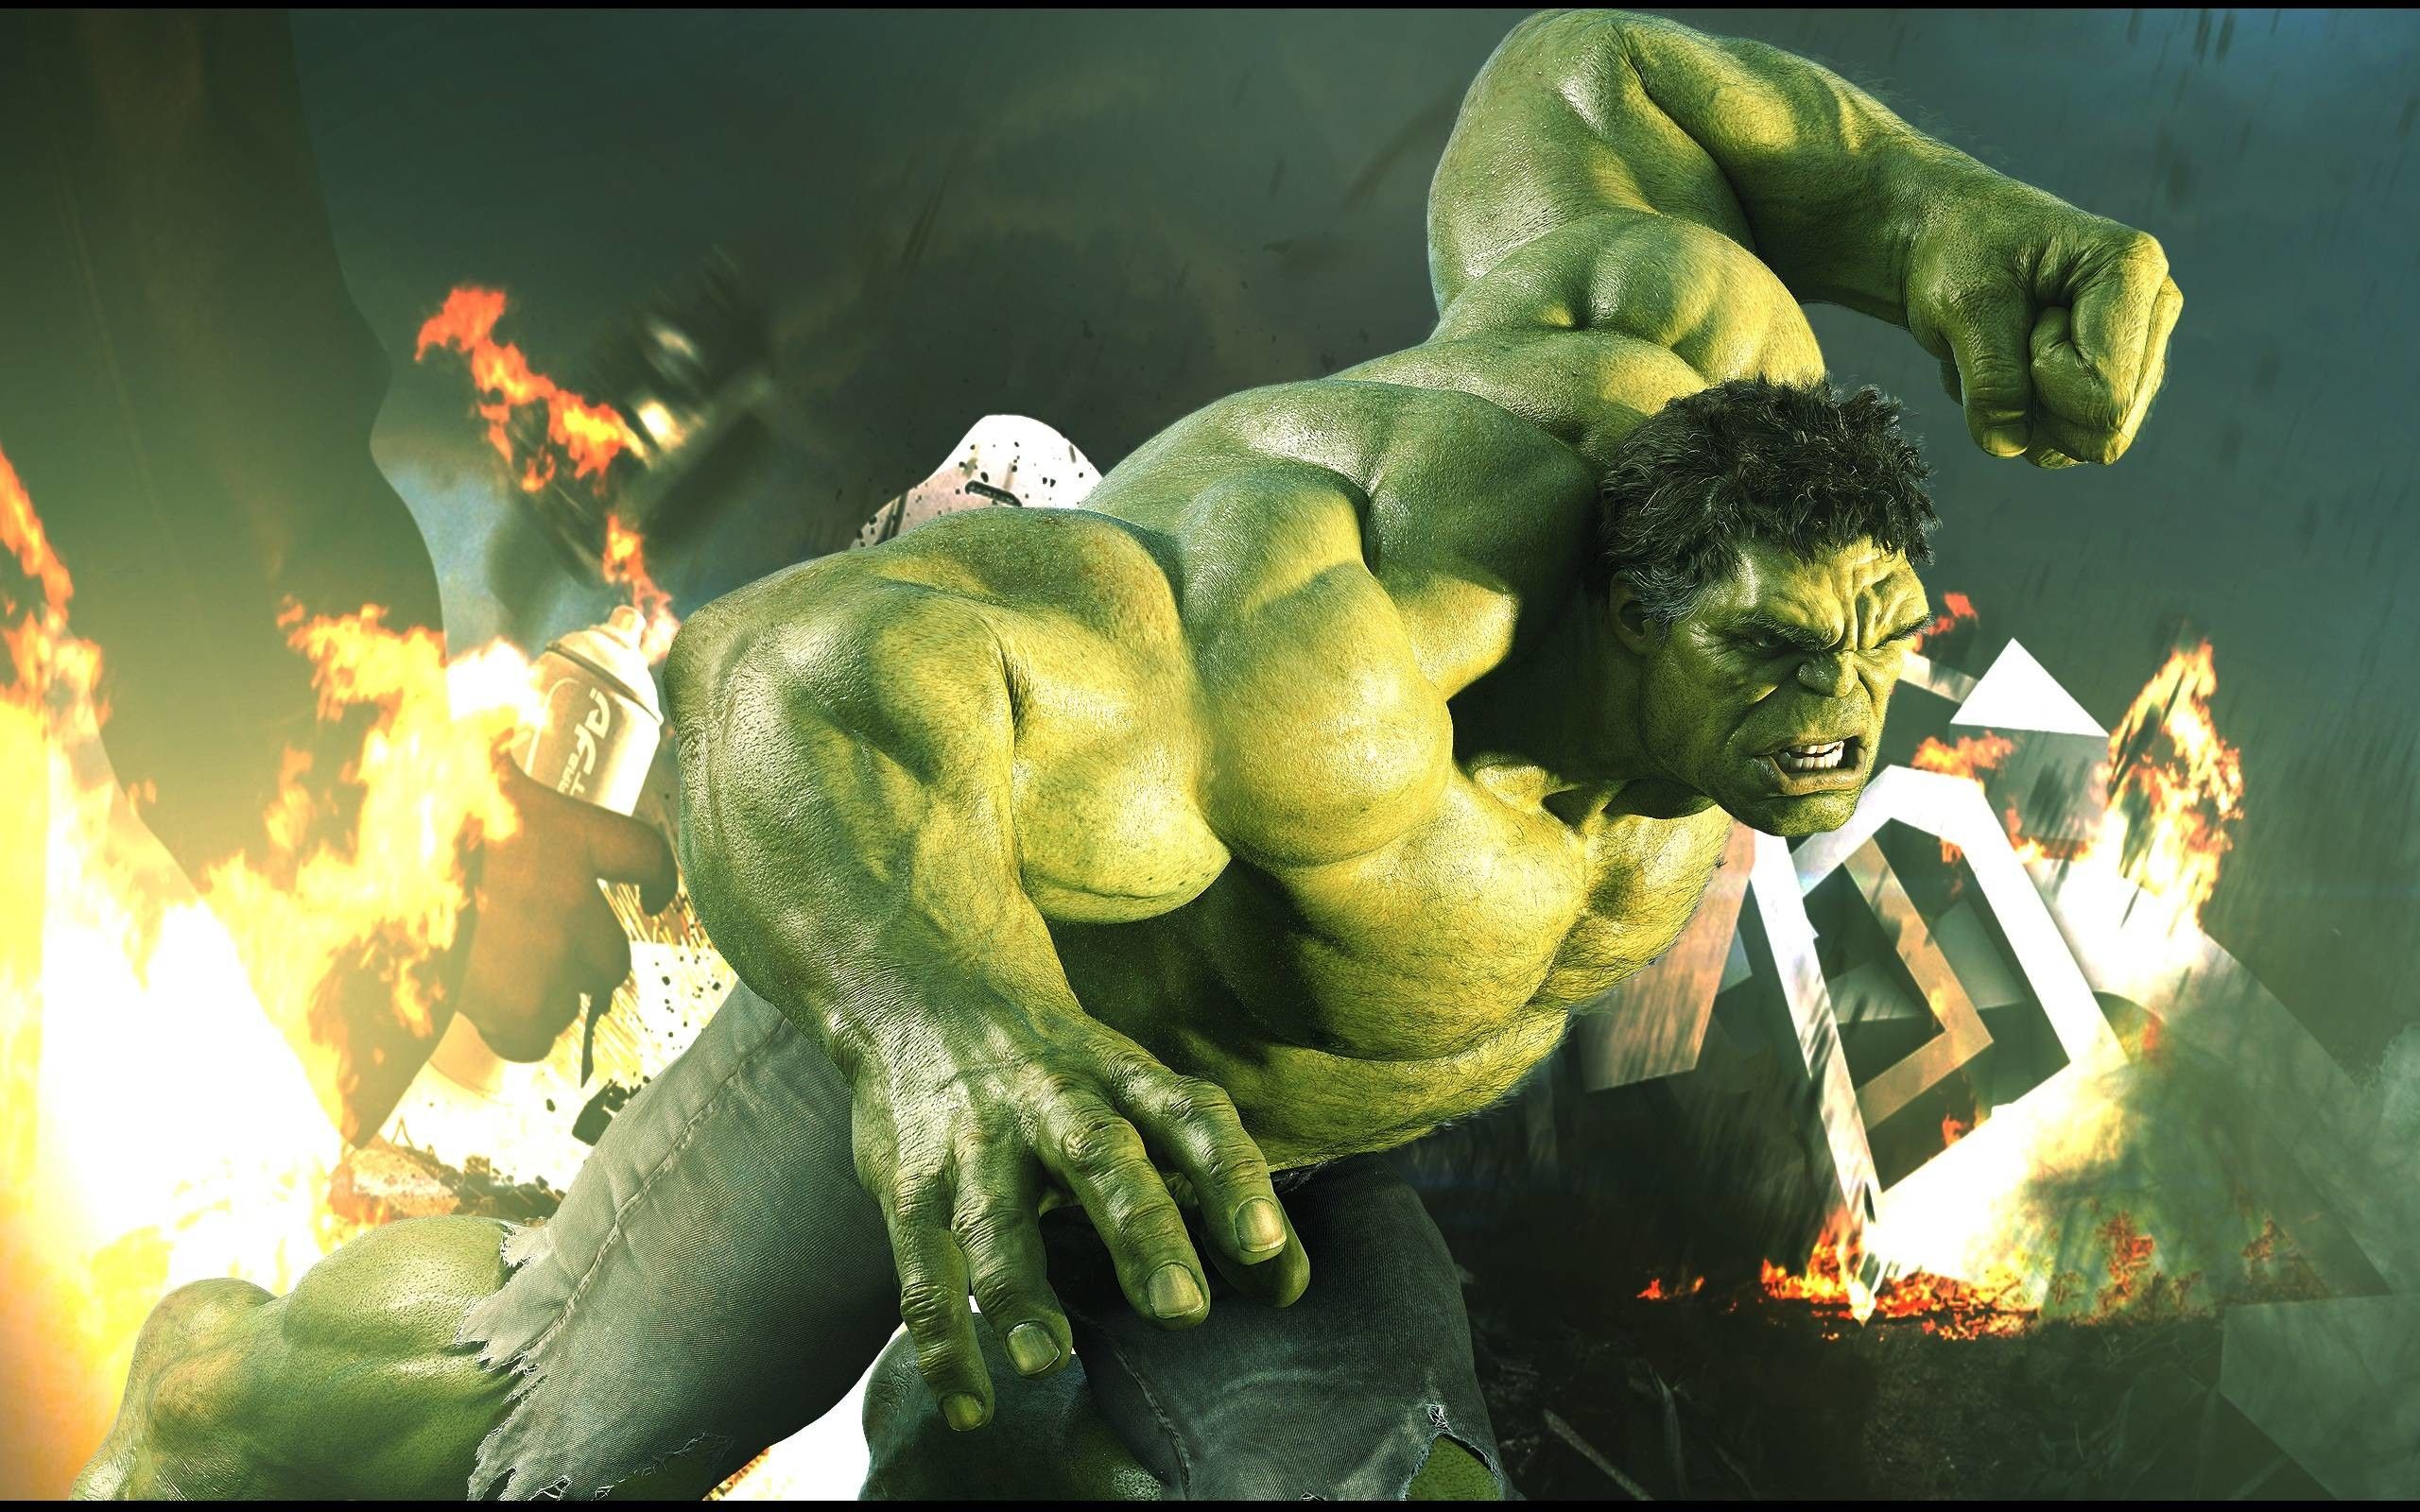 Free download World War Hulk Wallpaper - [2560x1600] for your Desktop, Mobile & Tablet. Explore The Incredible Hulk Desktop Wallpaper. The Incredible Hulk Wallpaper, The Incredible Hulk Wallpaper